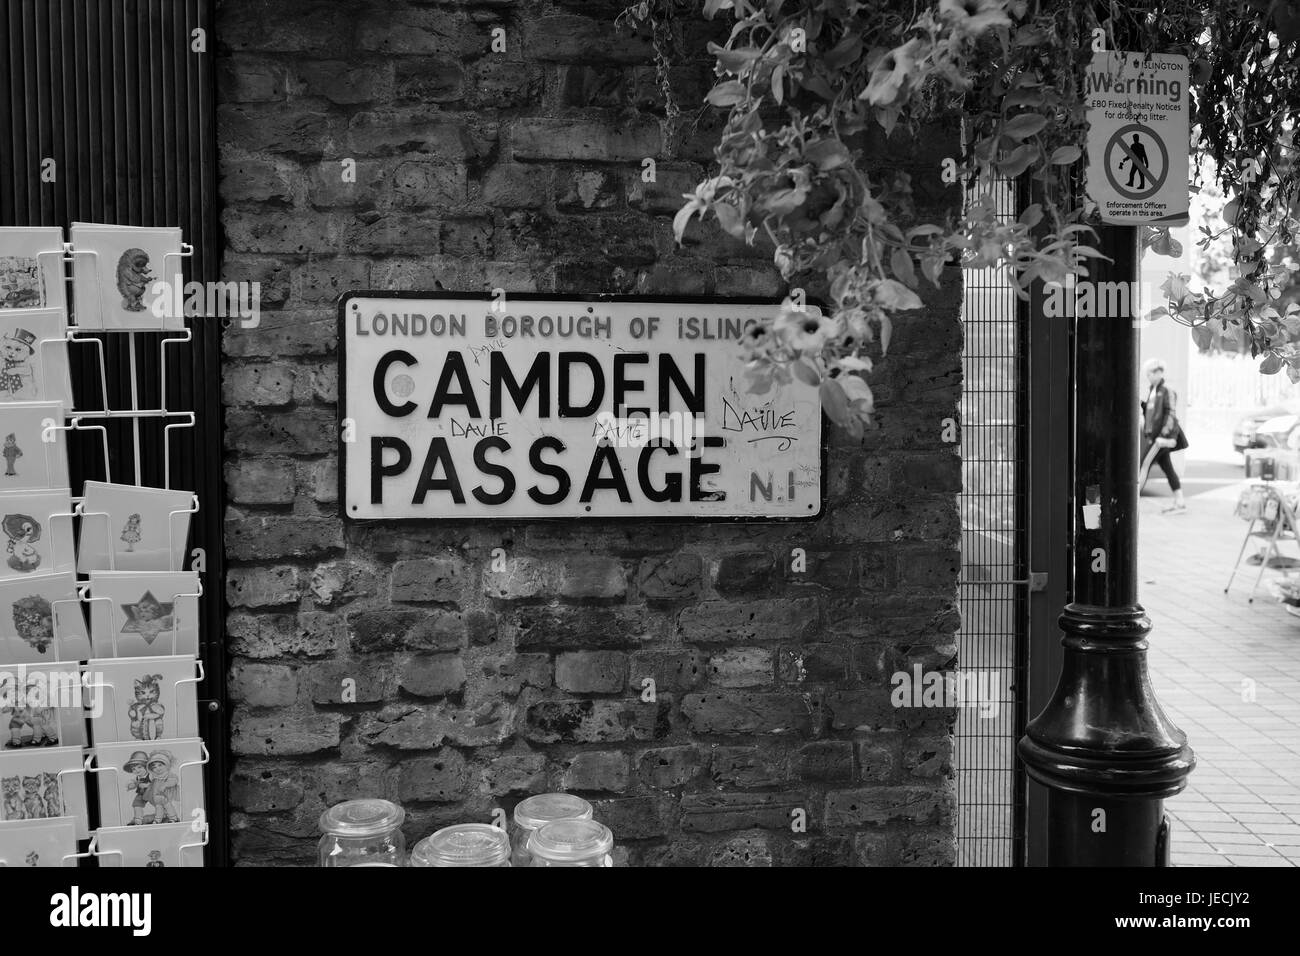 Camden Passage near the Angel in the London Borough of Islington.  Home to antiques. Stock Photo